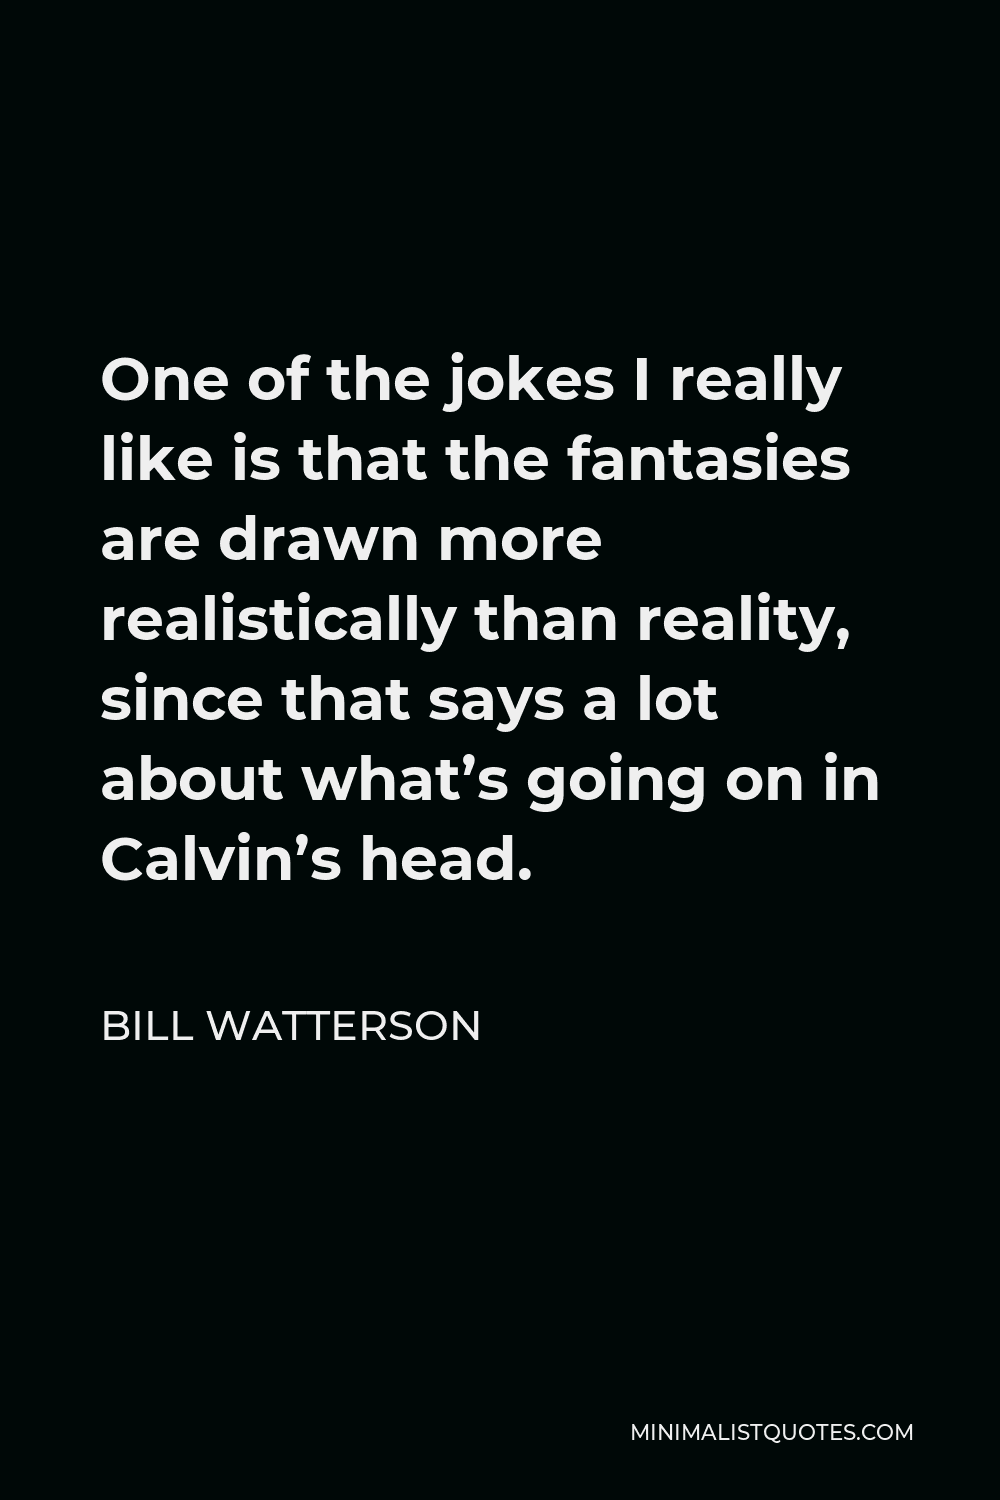 Bill Watterson Quote - One of the jokes I really like is that the fantasies are drawn more realistically than reality, since that says a lot about what’s going on in Calvin’s head.